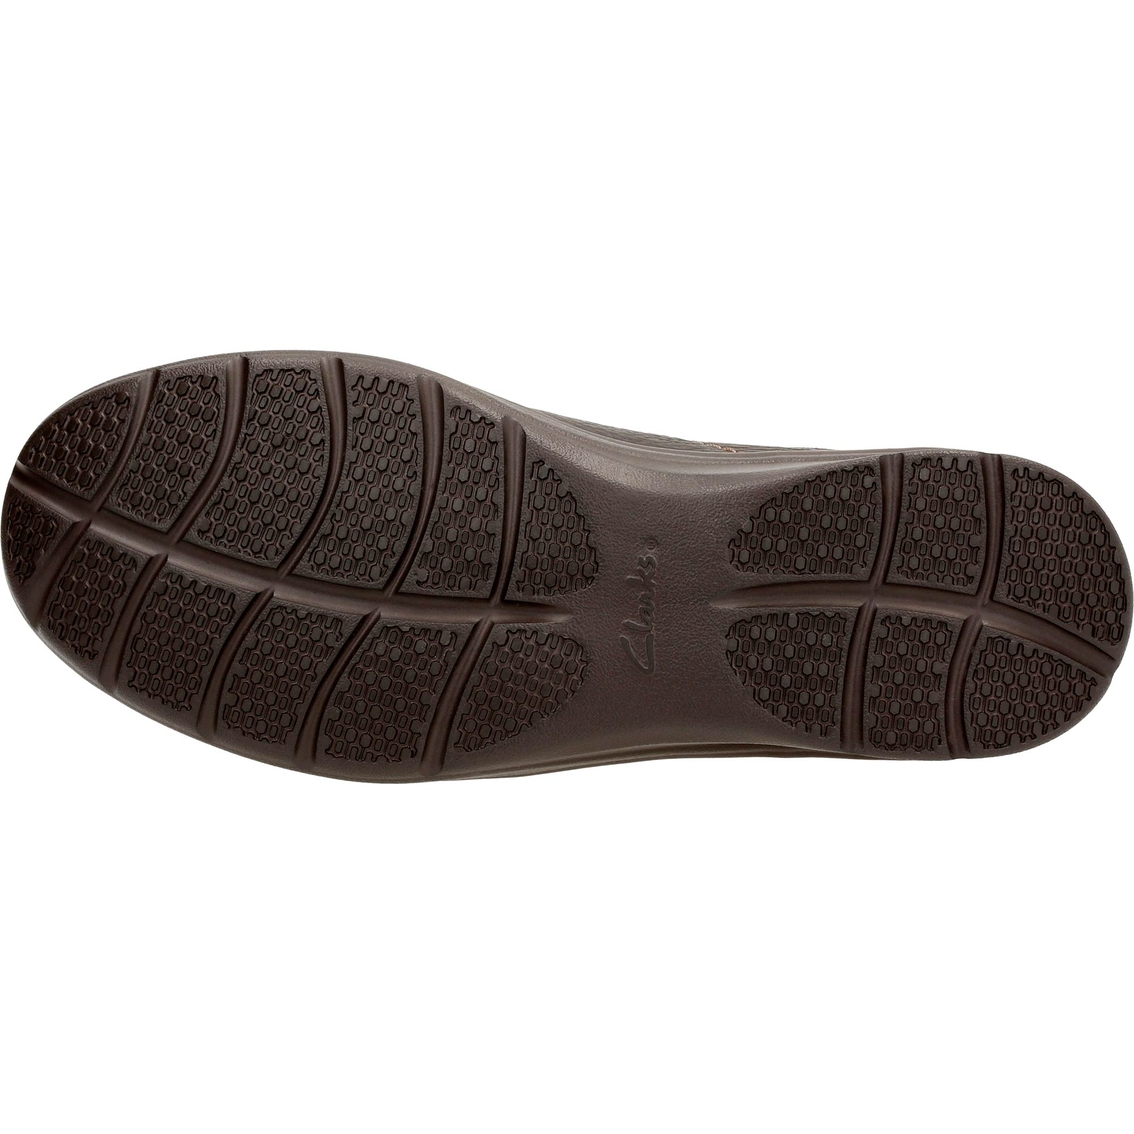 Clarks Men's Cotrell Step Slip On Shoes - Image 4 of 4